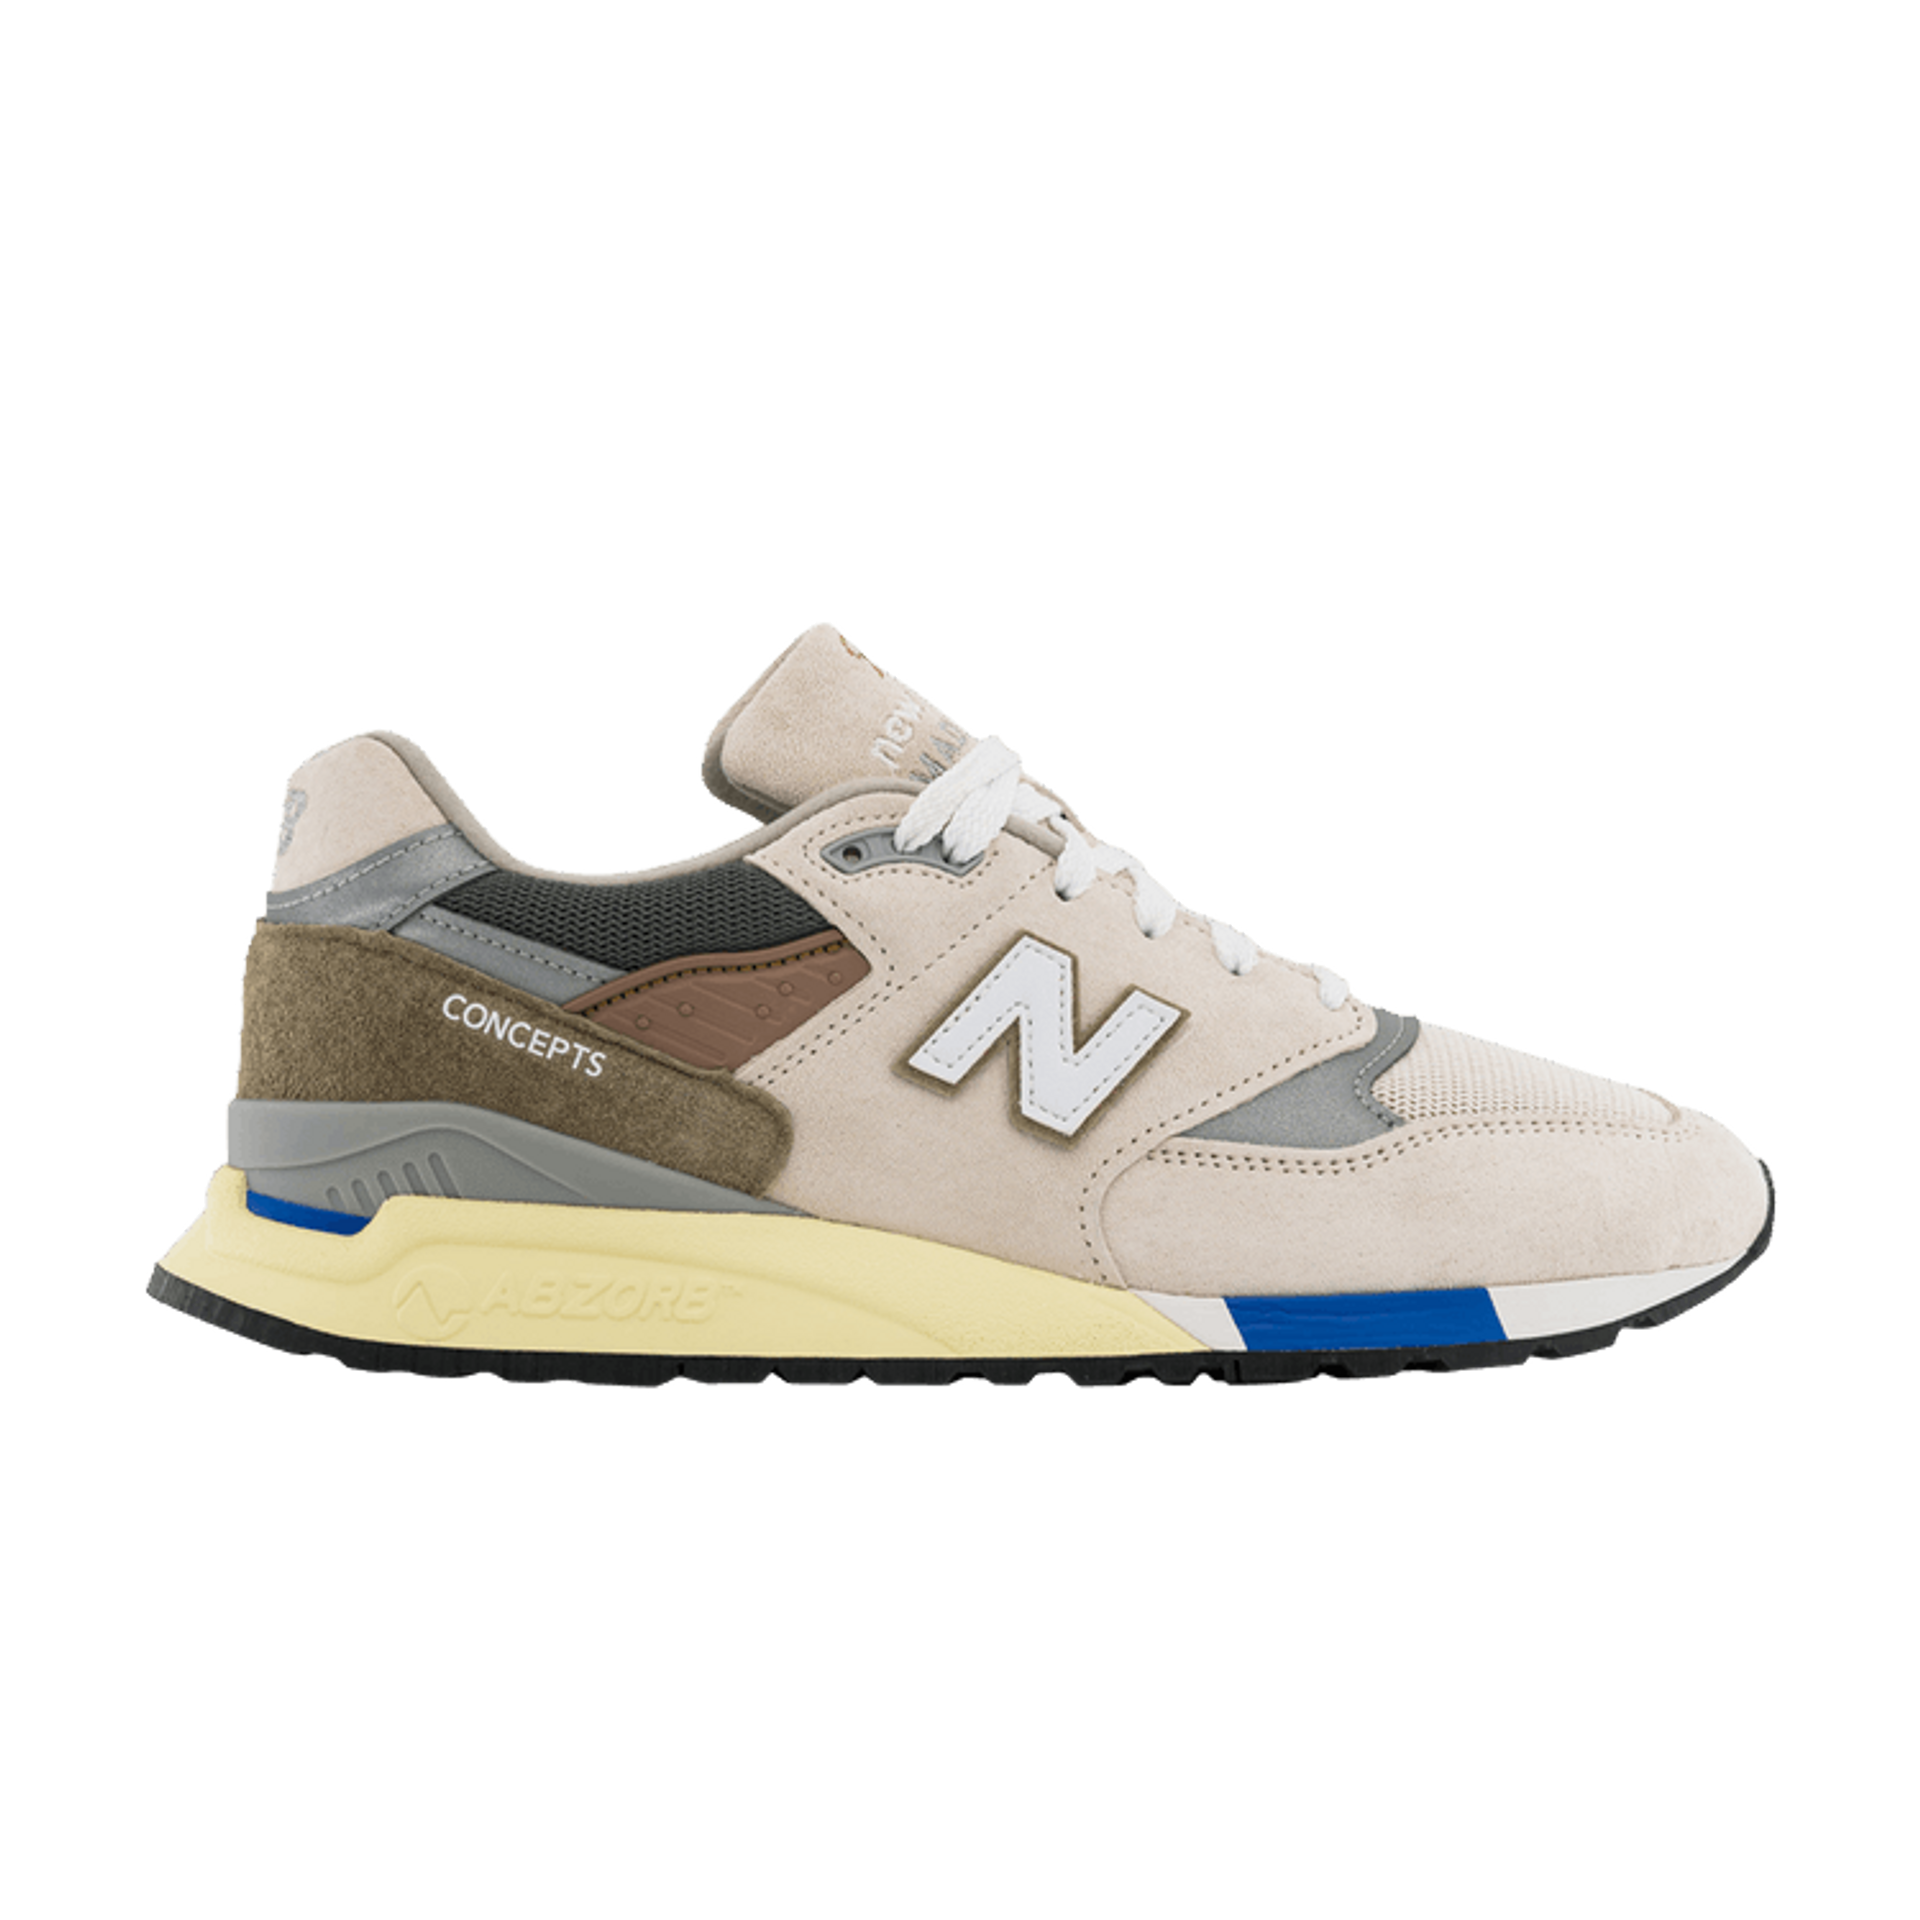 Concepts x New Balance 998 Made in USA 'C-Note' 2023